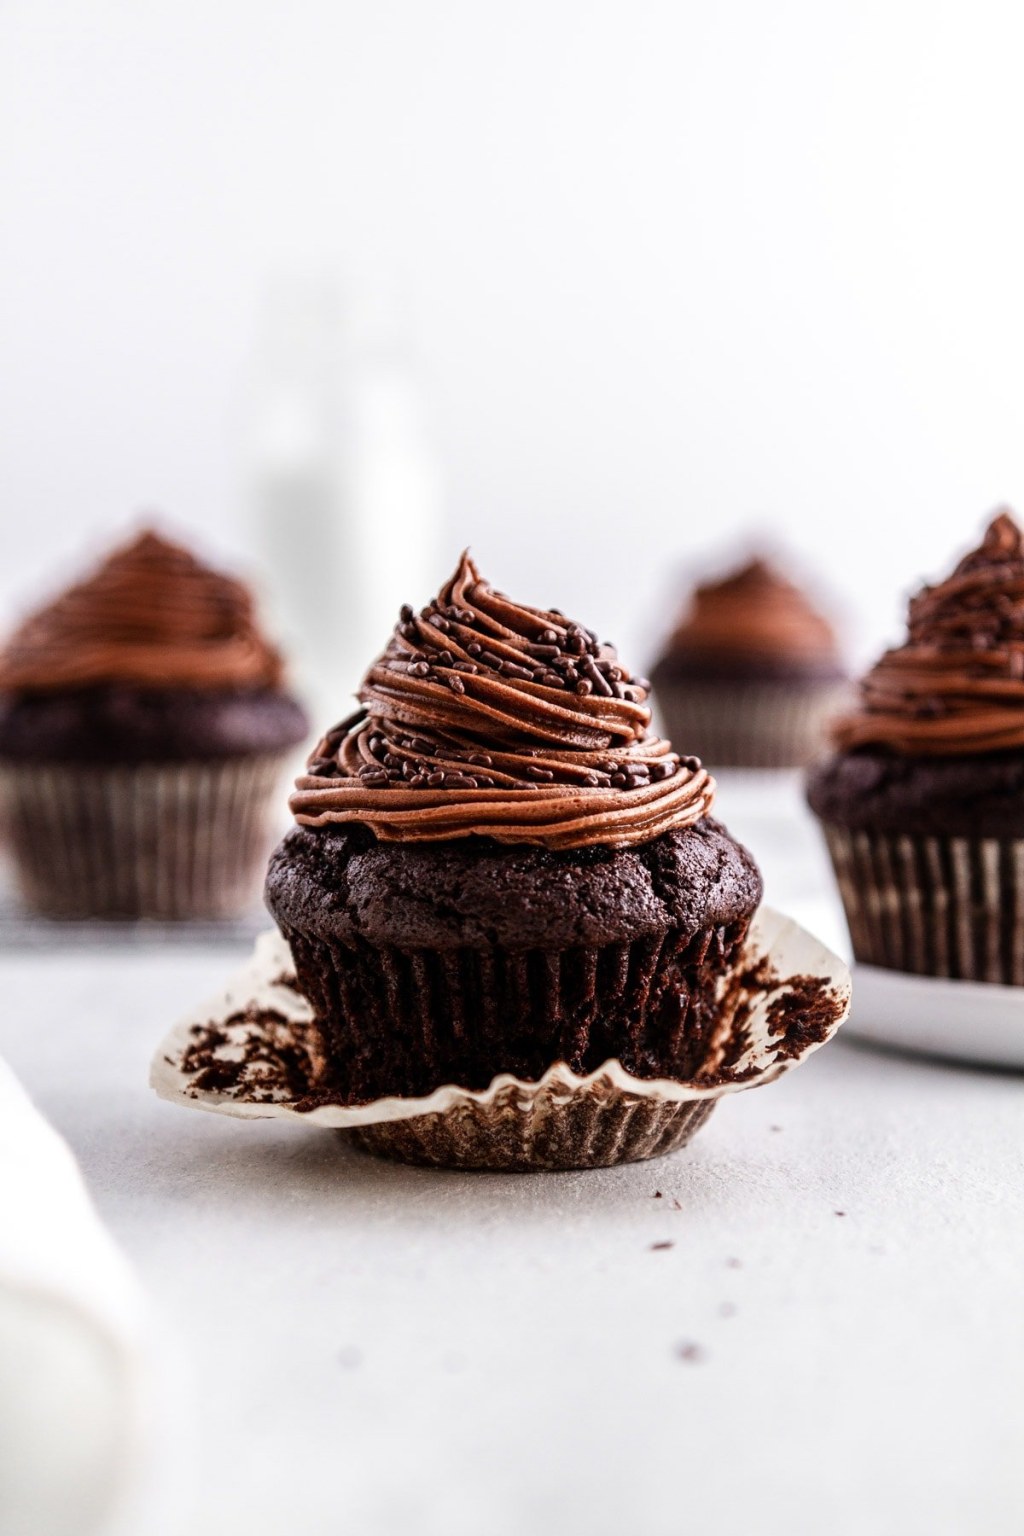 Picture of: Dark Chocolate Beet Cupcakes with Mocha Buttercream Frosting